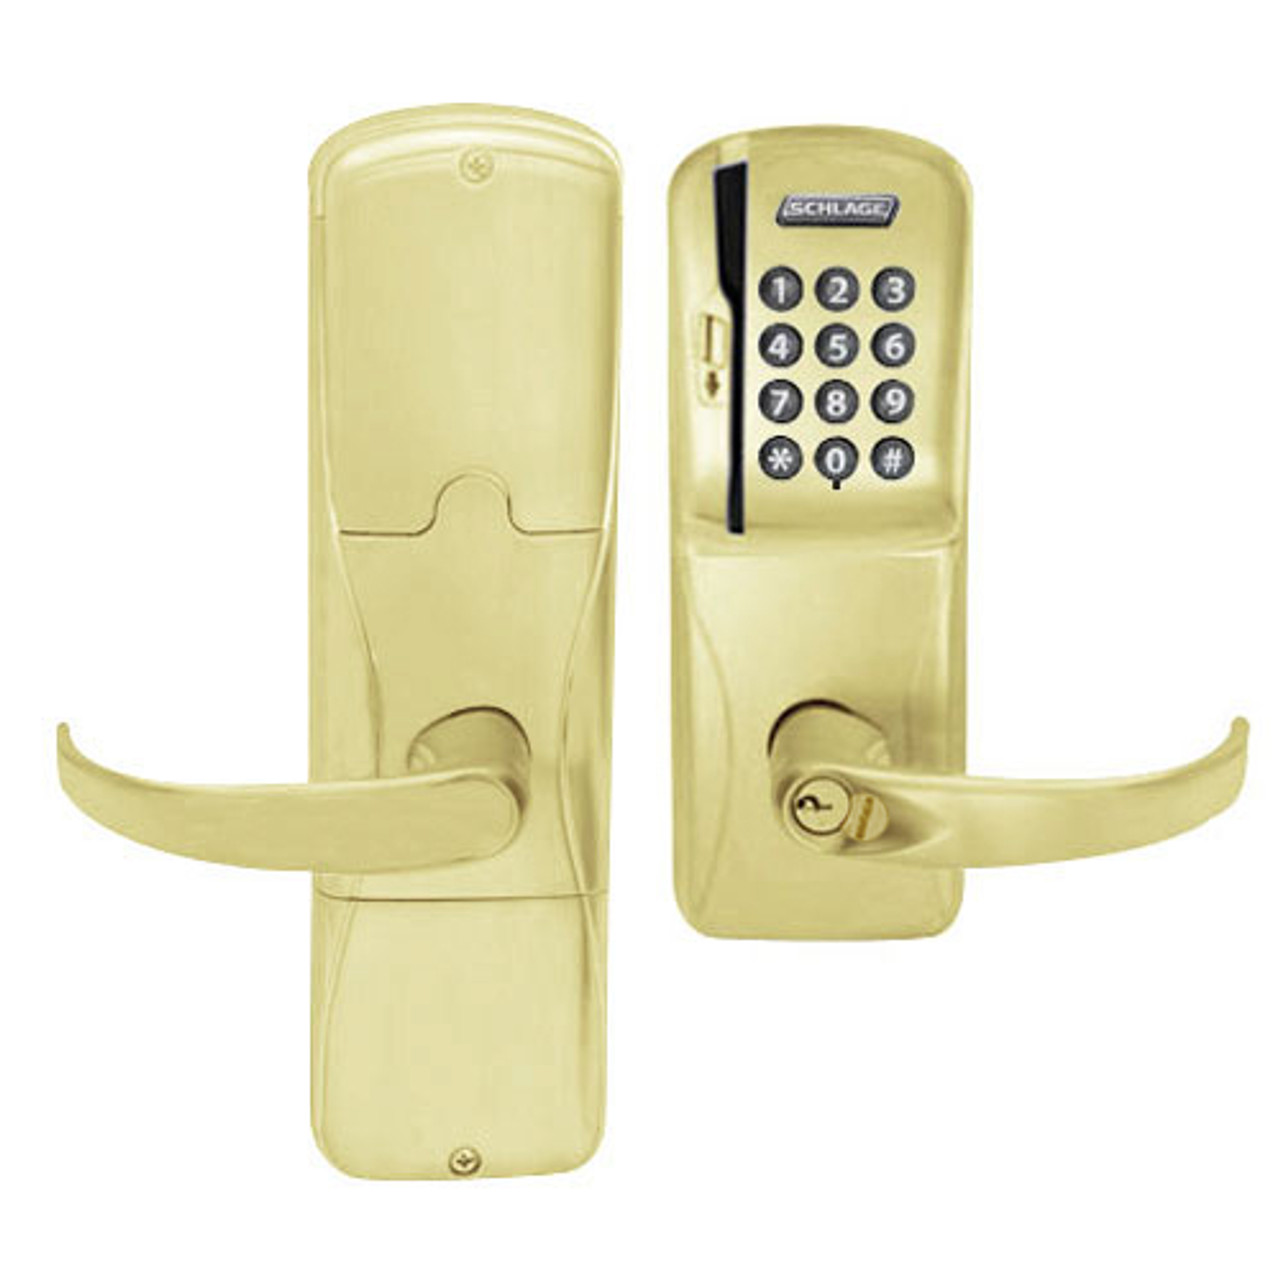 AD200-MD-60-MSK-SPA-GD-29R-606 Schlage Apartment Mortise Deadbolt Magnetic Stripe Keypad Lock with Sparta Lever in Satin Brass